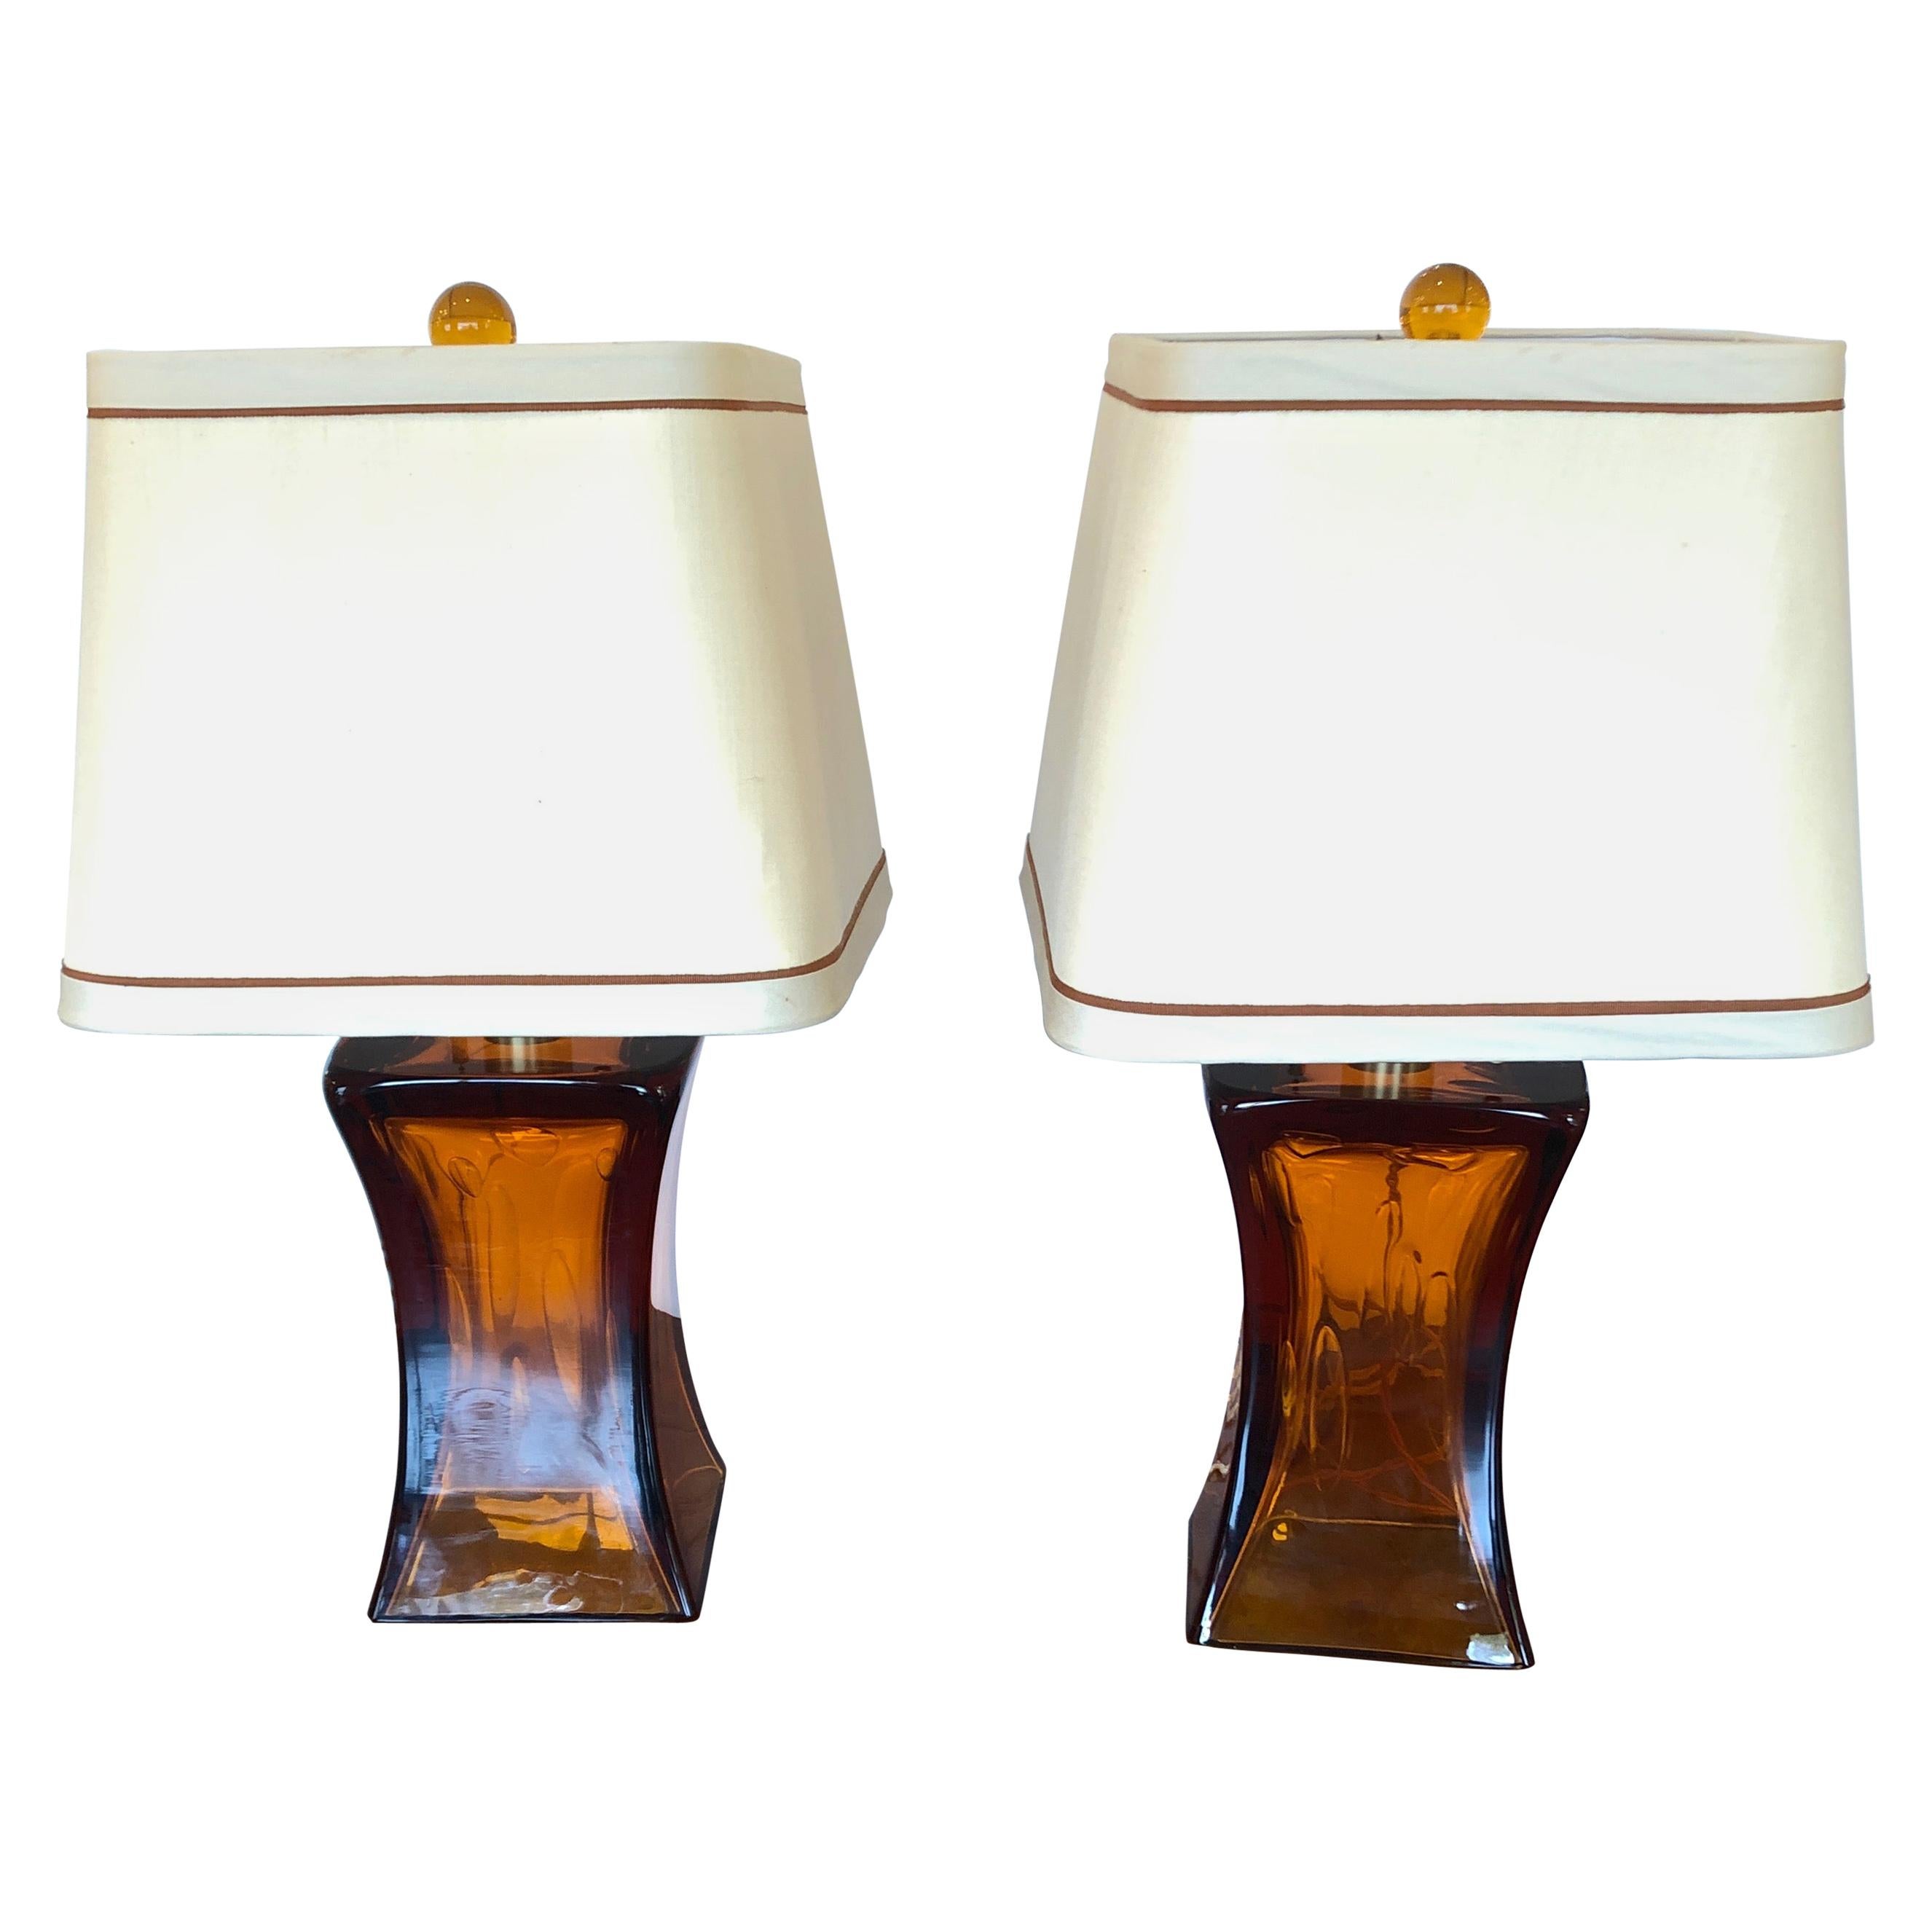 Smashing Pair of Amber Blown Glass Mid-Century Modern Table Lamps by Donghia